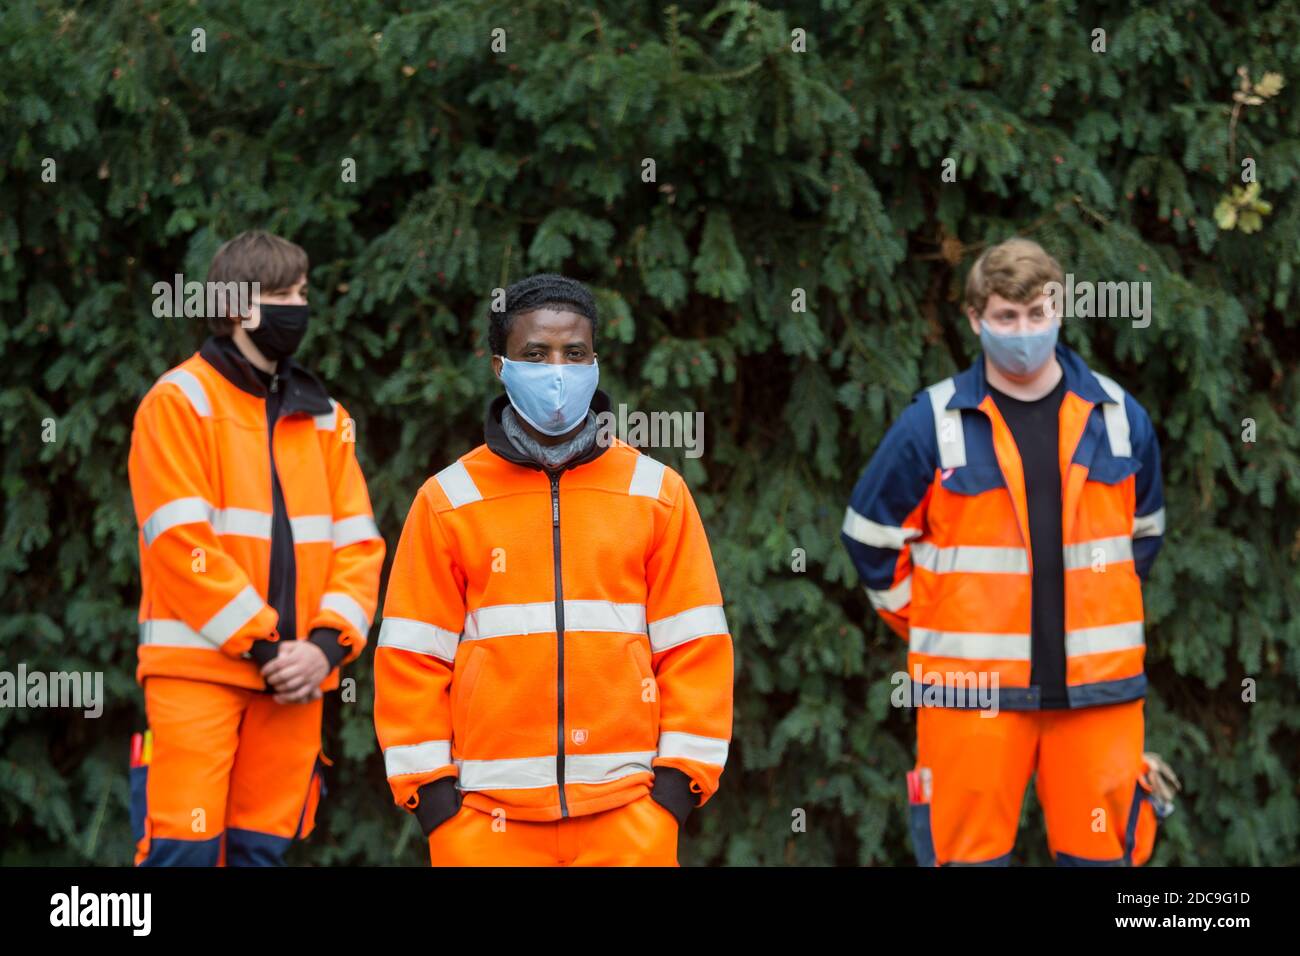 23.10.2020, Bremen, Bremen, Germany - Trainees for landscape gardeners with respiratory protection masks. 00A201023D043CAROEX.JPG [MODEL RELEASE: NO, Stock Photo